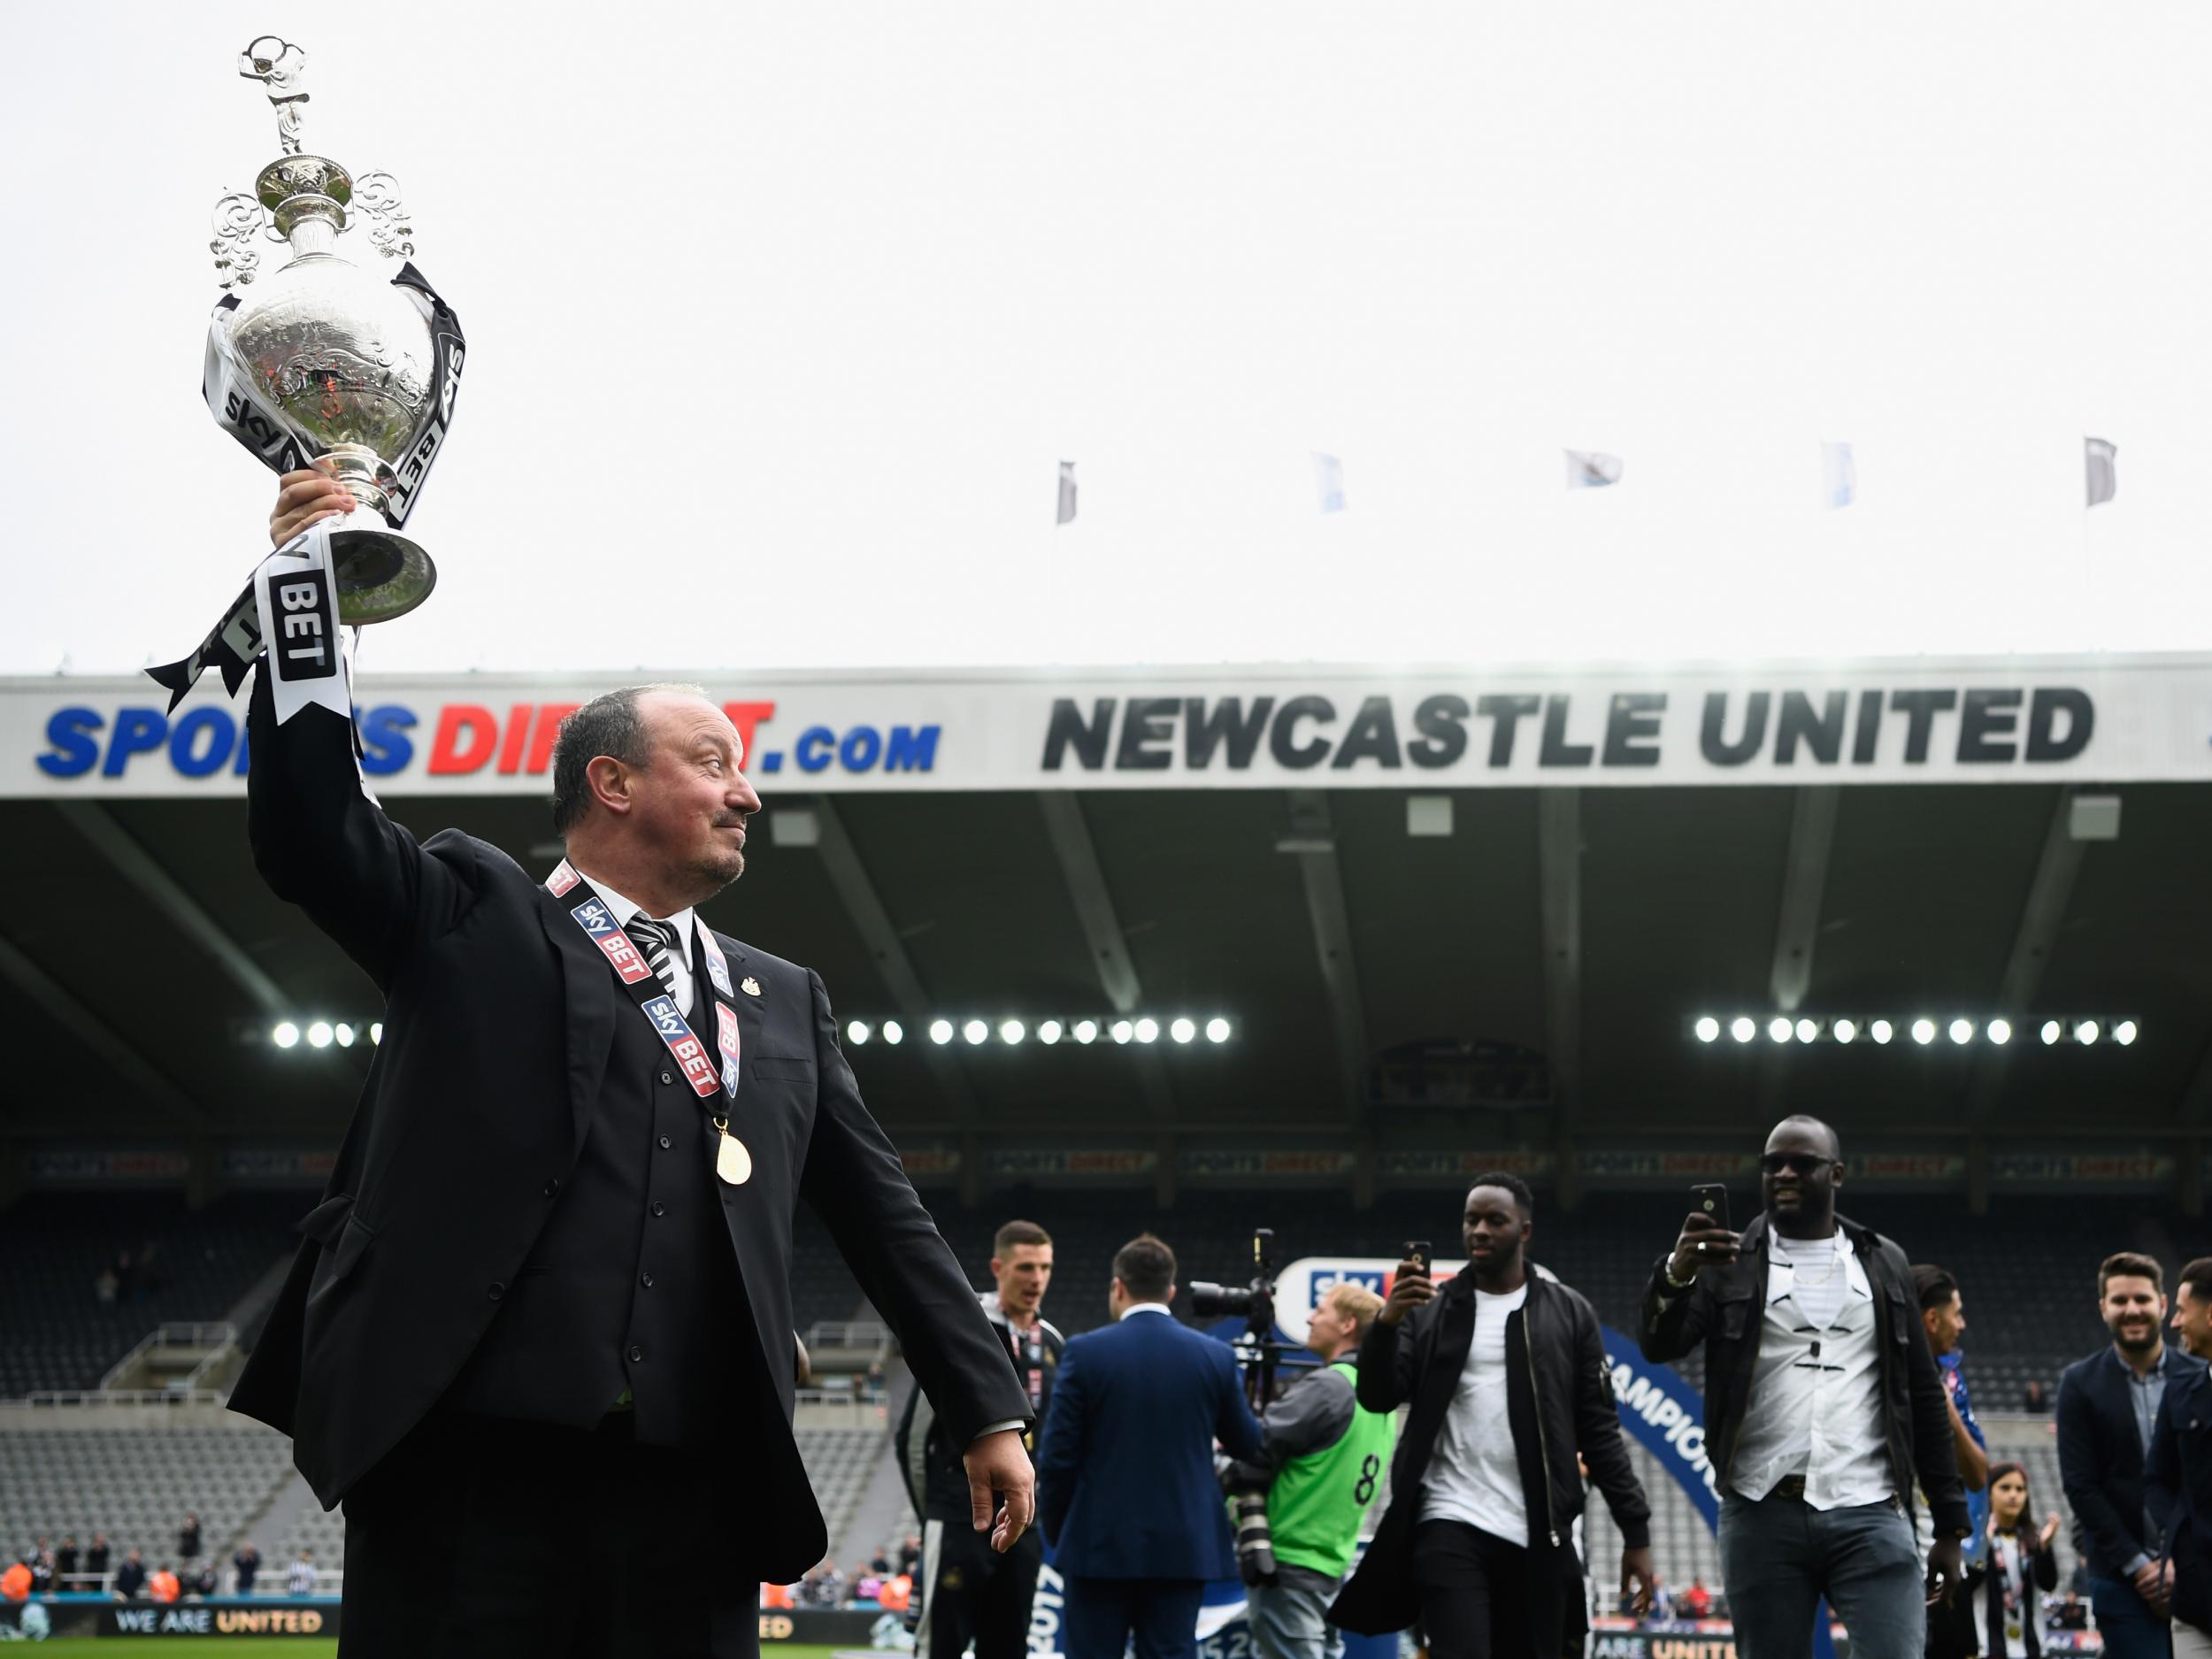 Benitez's future has been called into question at times this summer